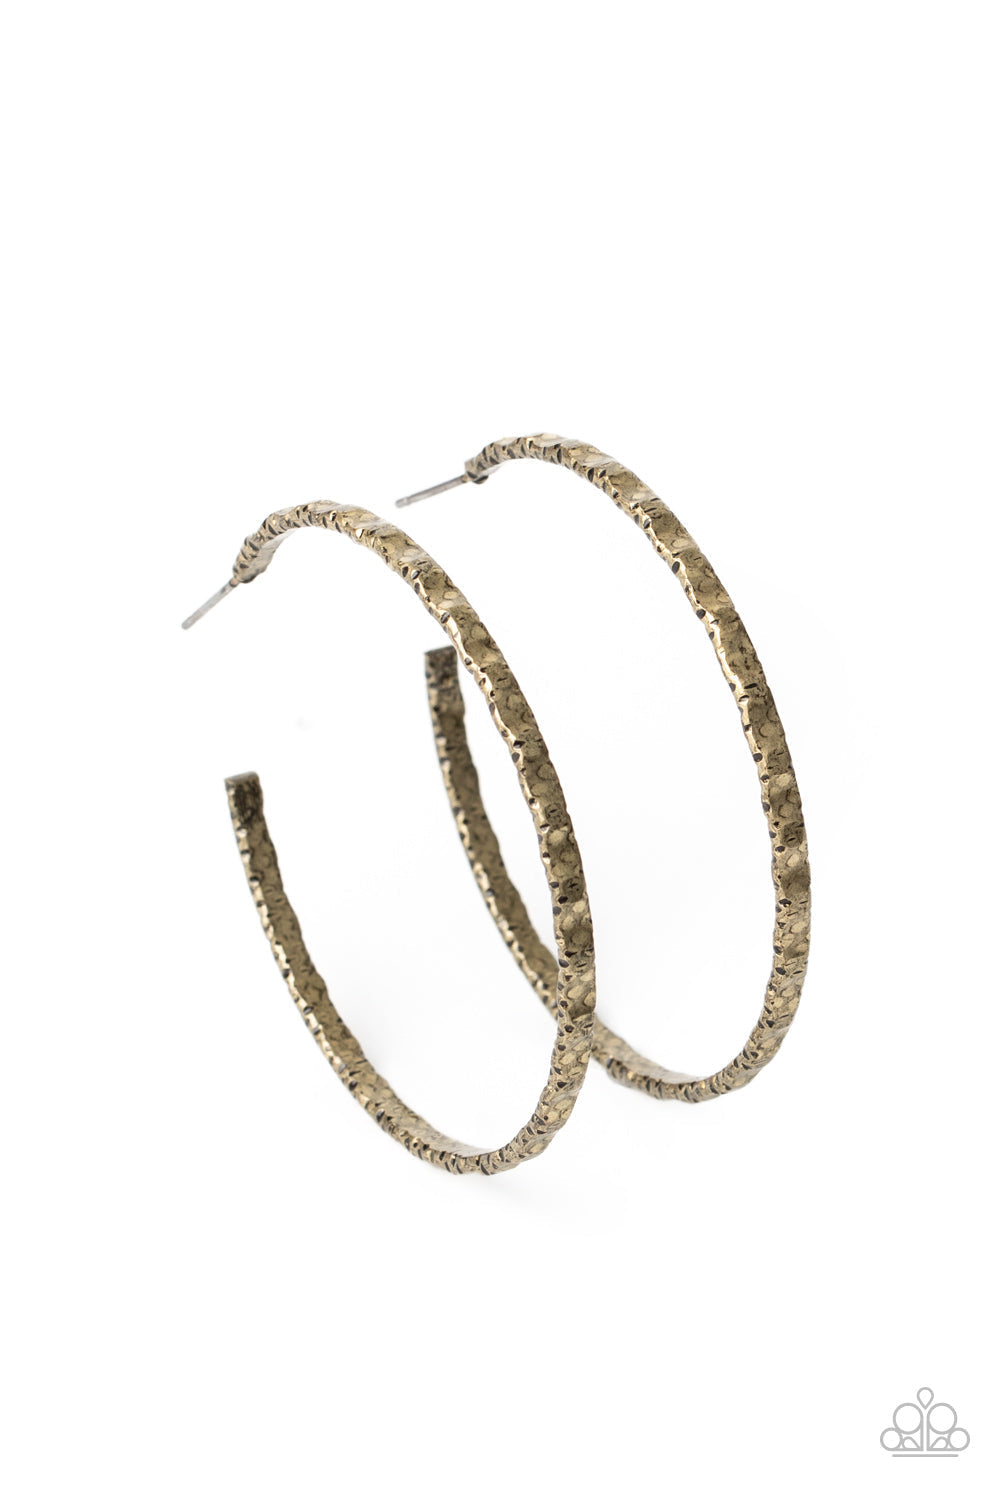 Grungy Grit - Brass Hoop Earrings - Paparazzi Accessories - Brushed in an antiqued finish, a gritty brass hoop is hammered in grungy details for an edgy industrial flair. Earring attaches to a standard post fitting. Hoop measures approximately 2" in diameter hoop earrings.